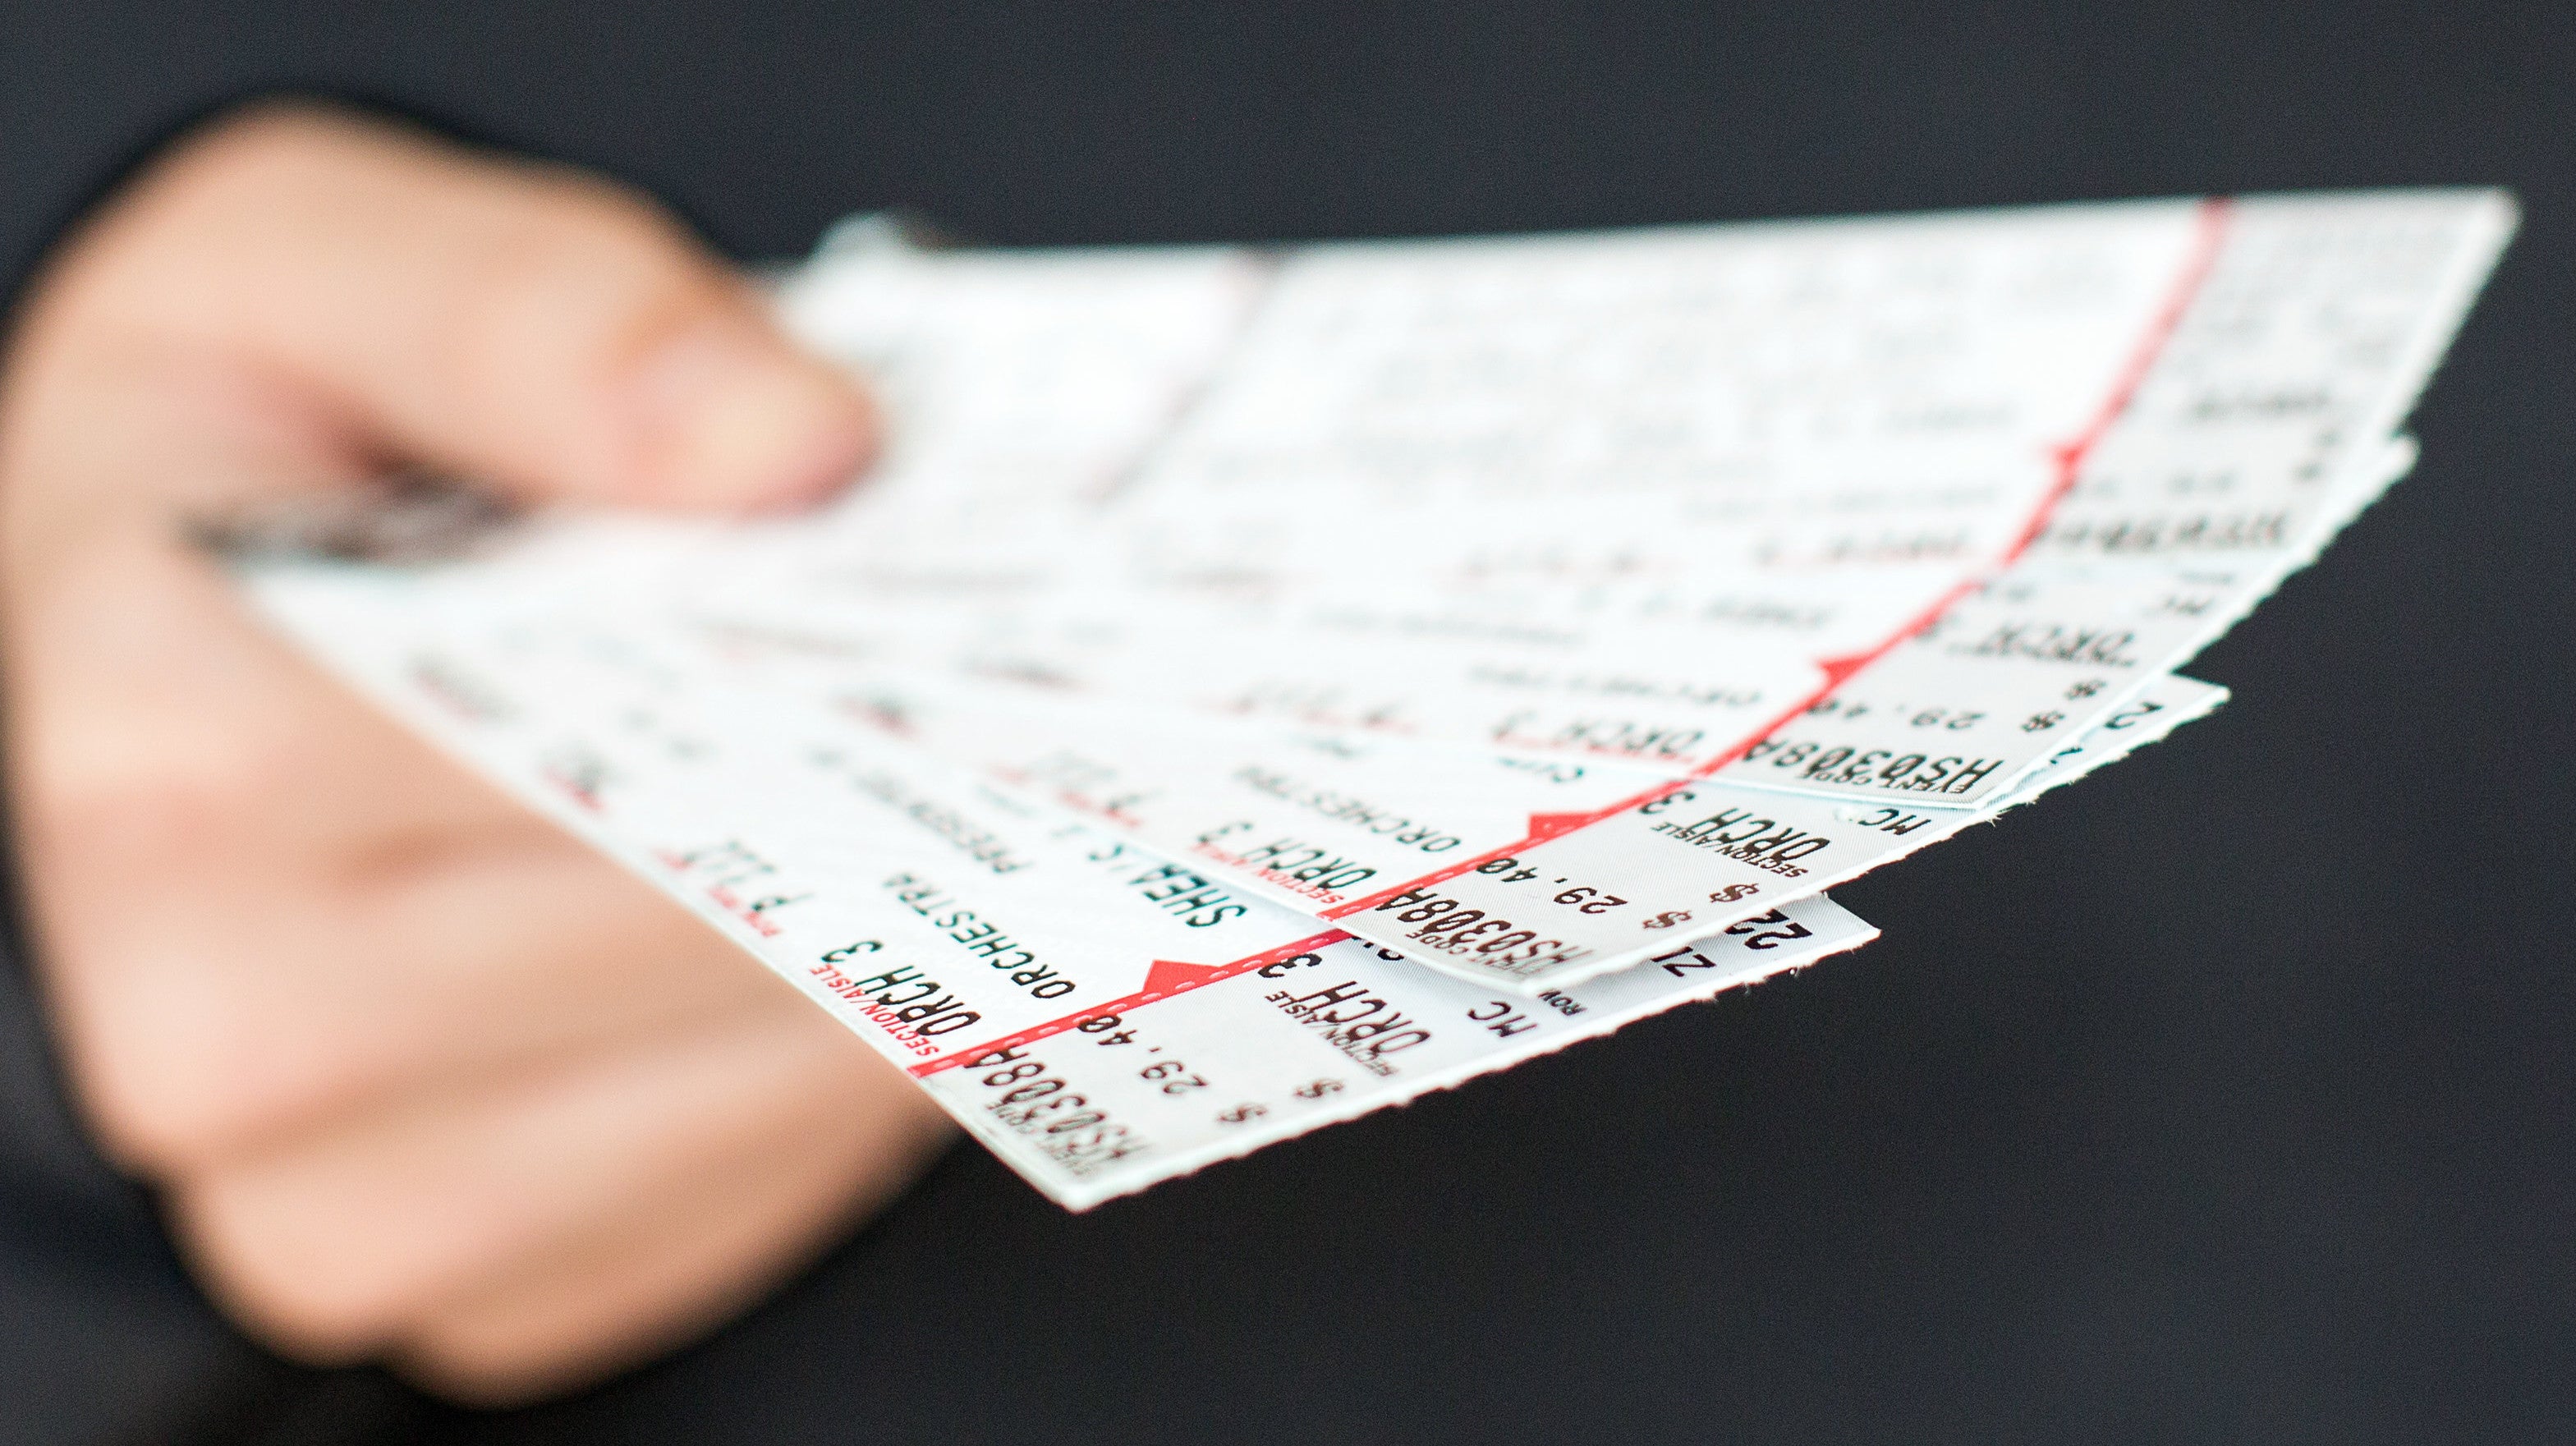 How To Get The Cheapest Tickets: From Movies To Concerts To Sports